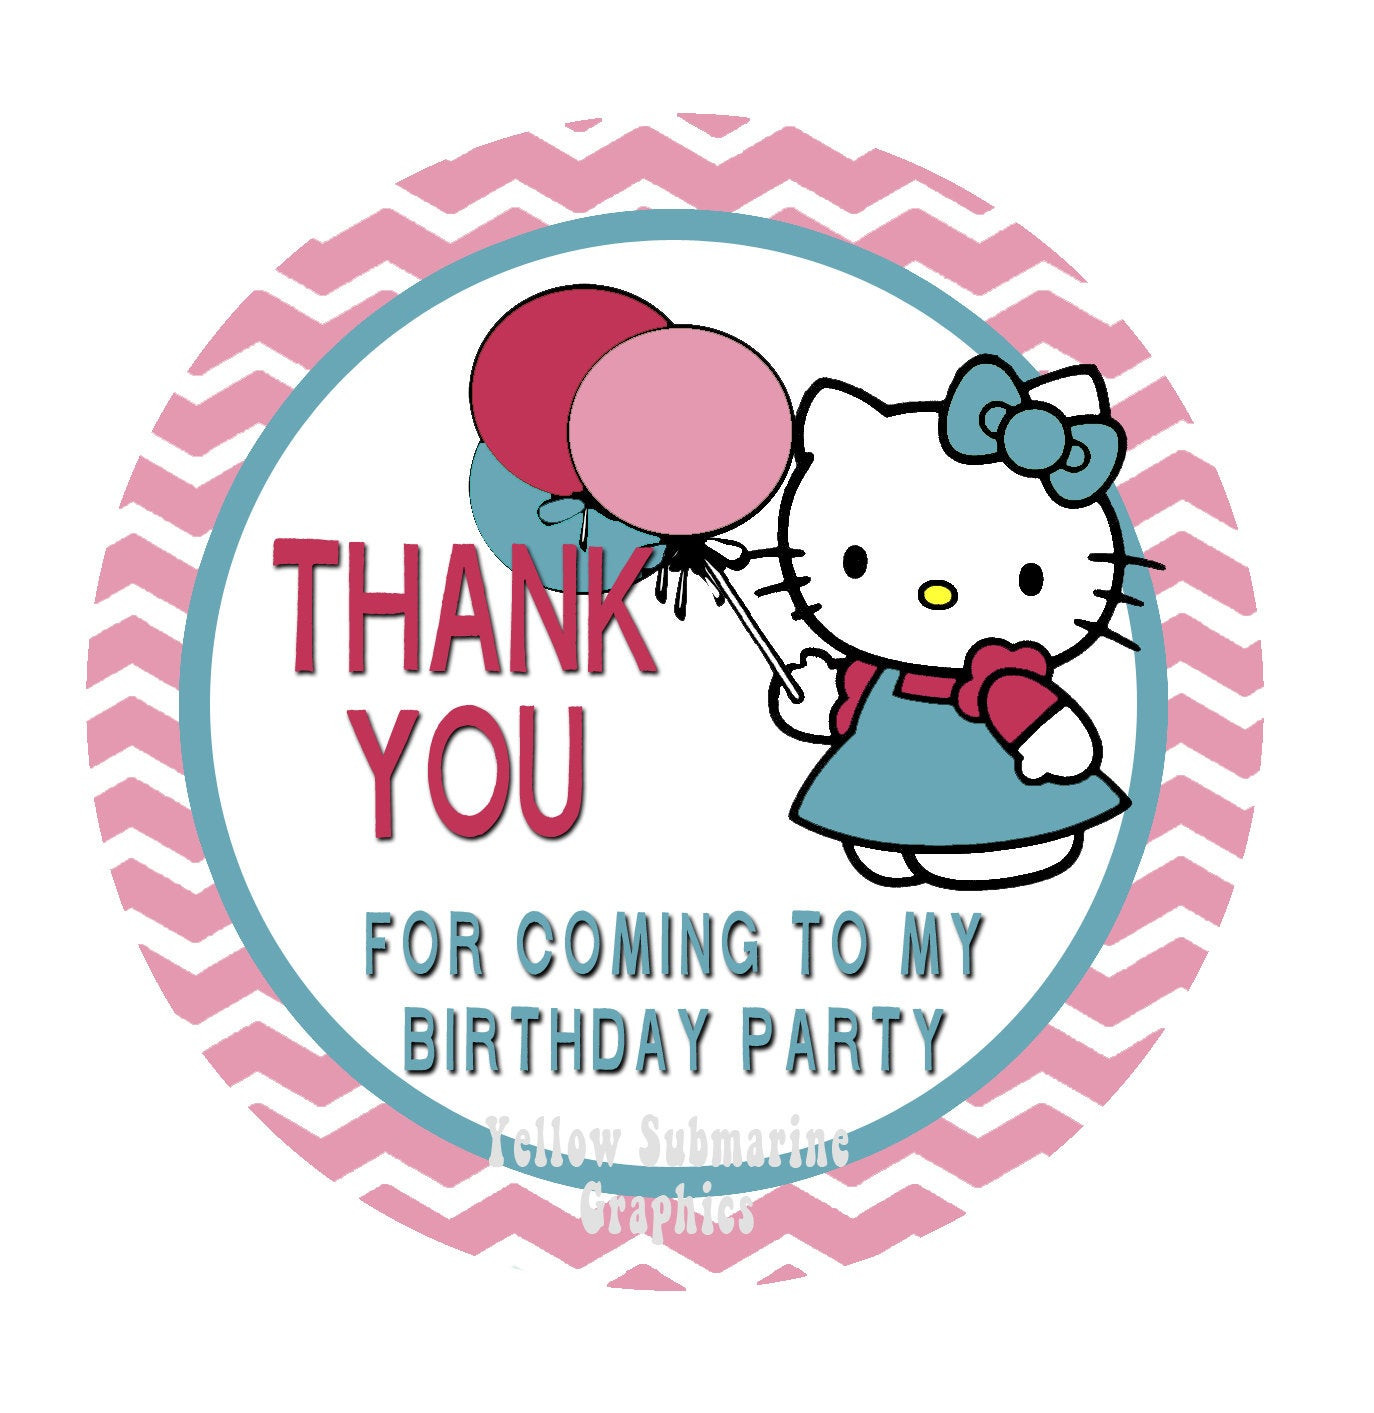 Thank You For Coming To My Birthday Party Kids
 Items similar to DIGITAL Thank You for ing to My